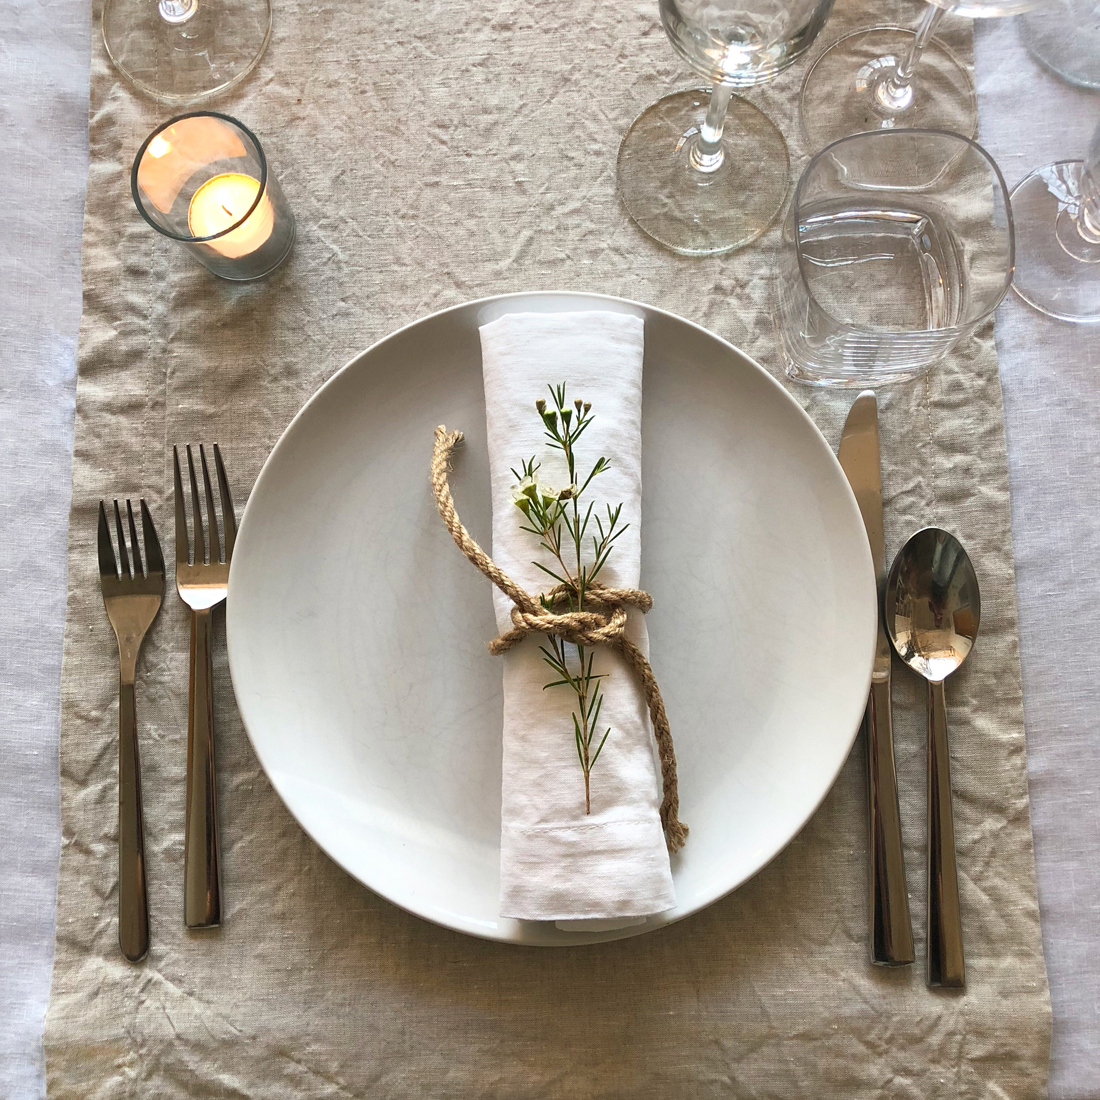 Scandinavian dinner party layering a white linen tablecloth with natural flax linen table runners and white linen napkins